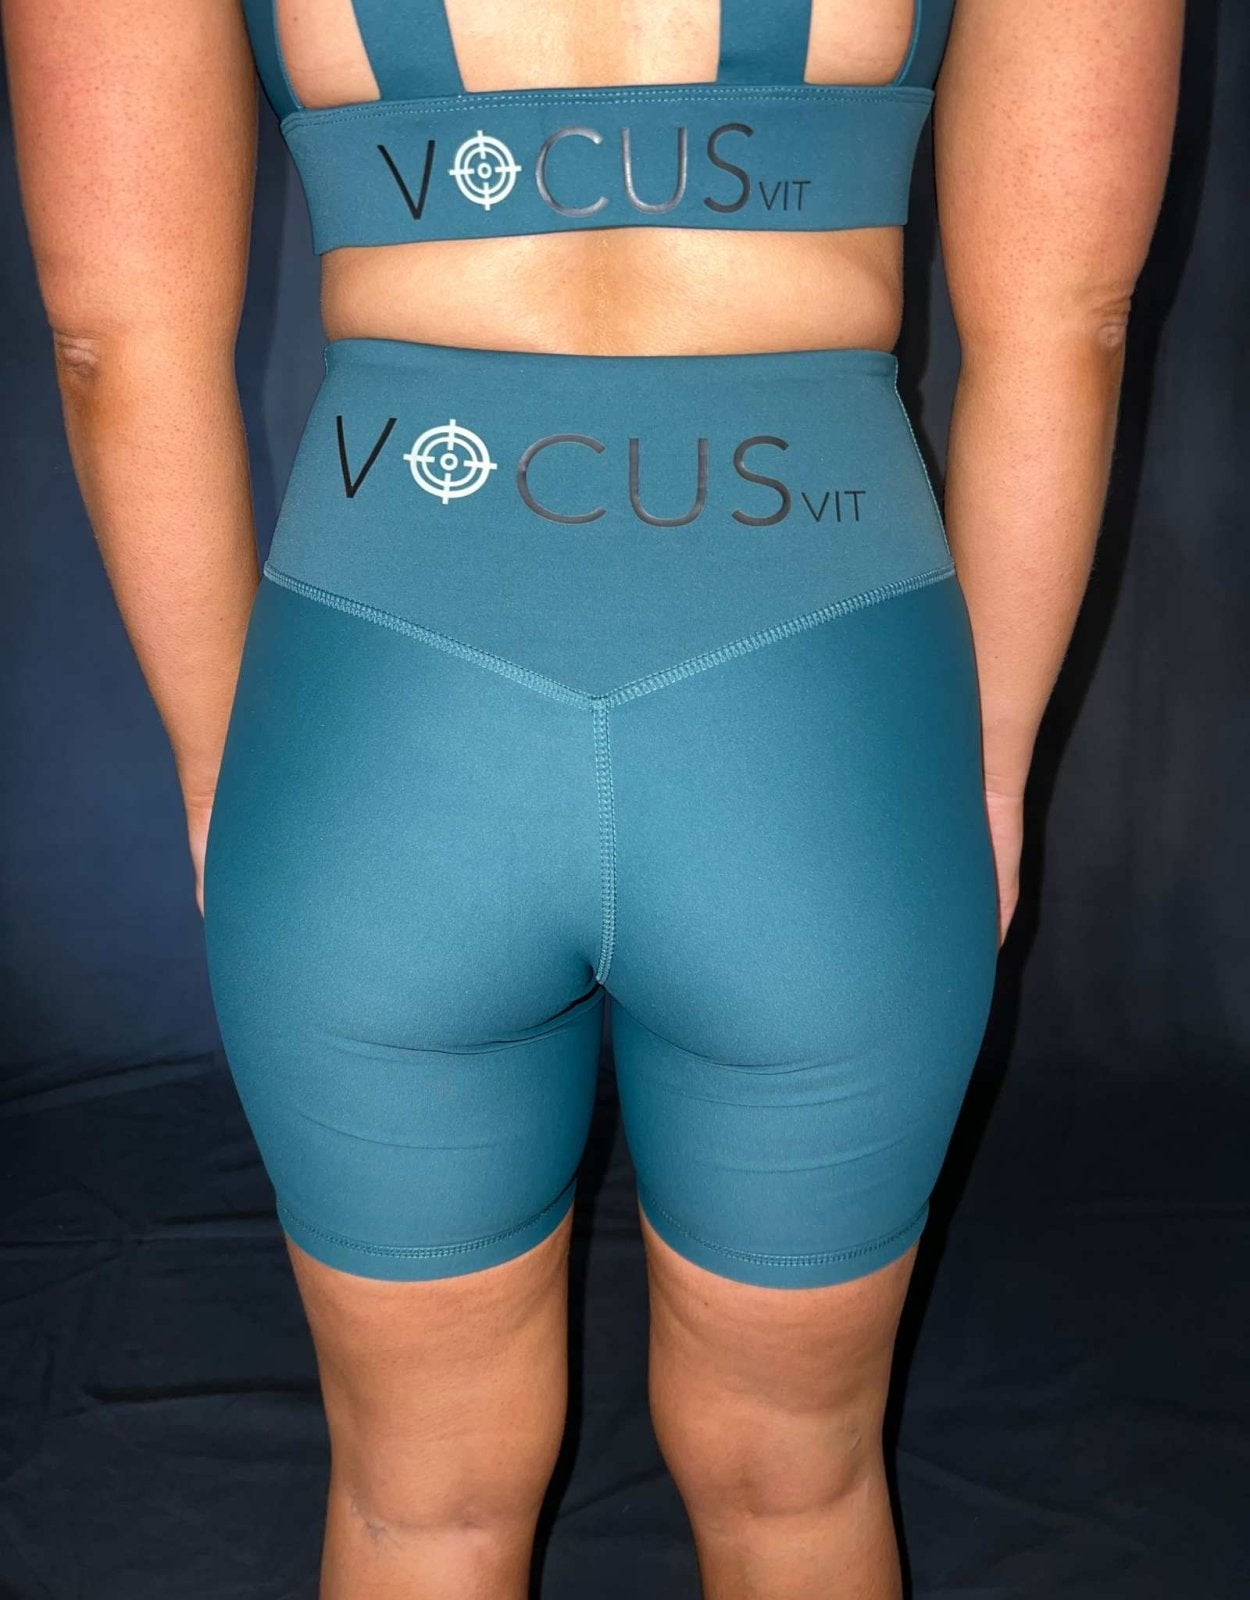 Girl from waist down. Wearing green (evergreen) Vocus Vit shorts. Close up photo of shorts. Vocus vit is a sustainable women's activewear brand that uses recycled materials and ethical manufacturing. Based in Northern Ireland. Shipping worldwide.Sizes XS (8) TO XXL (18).